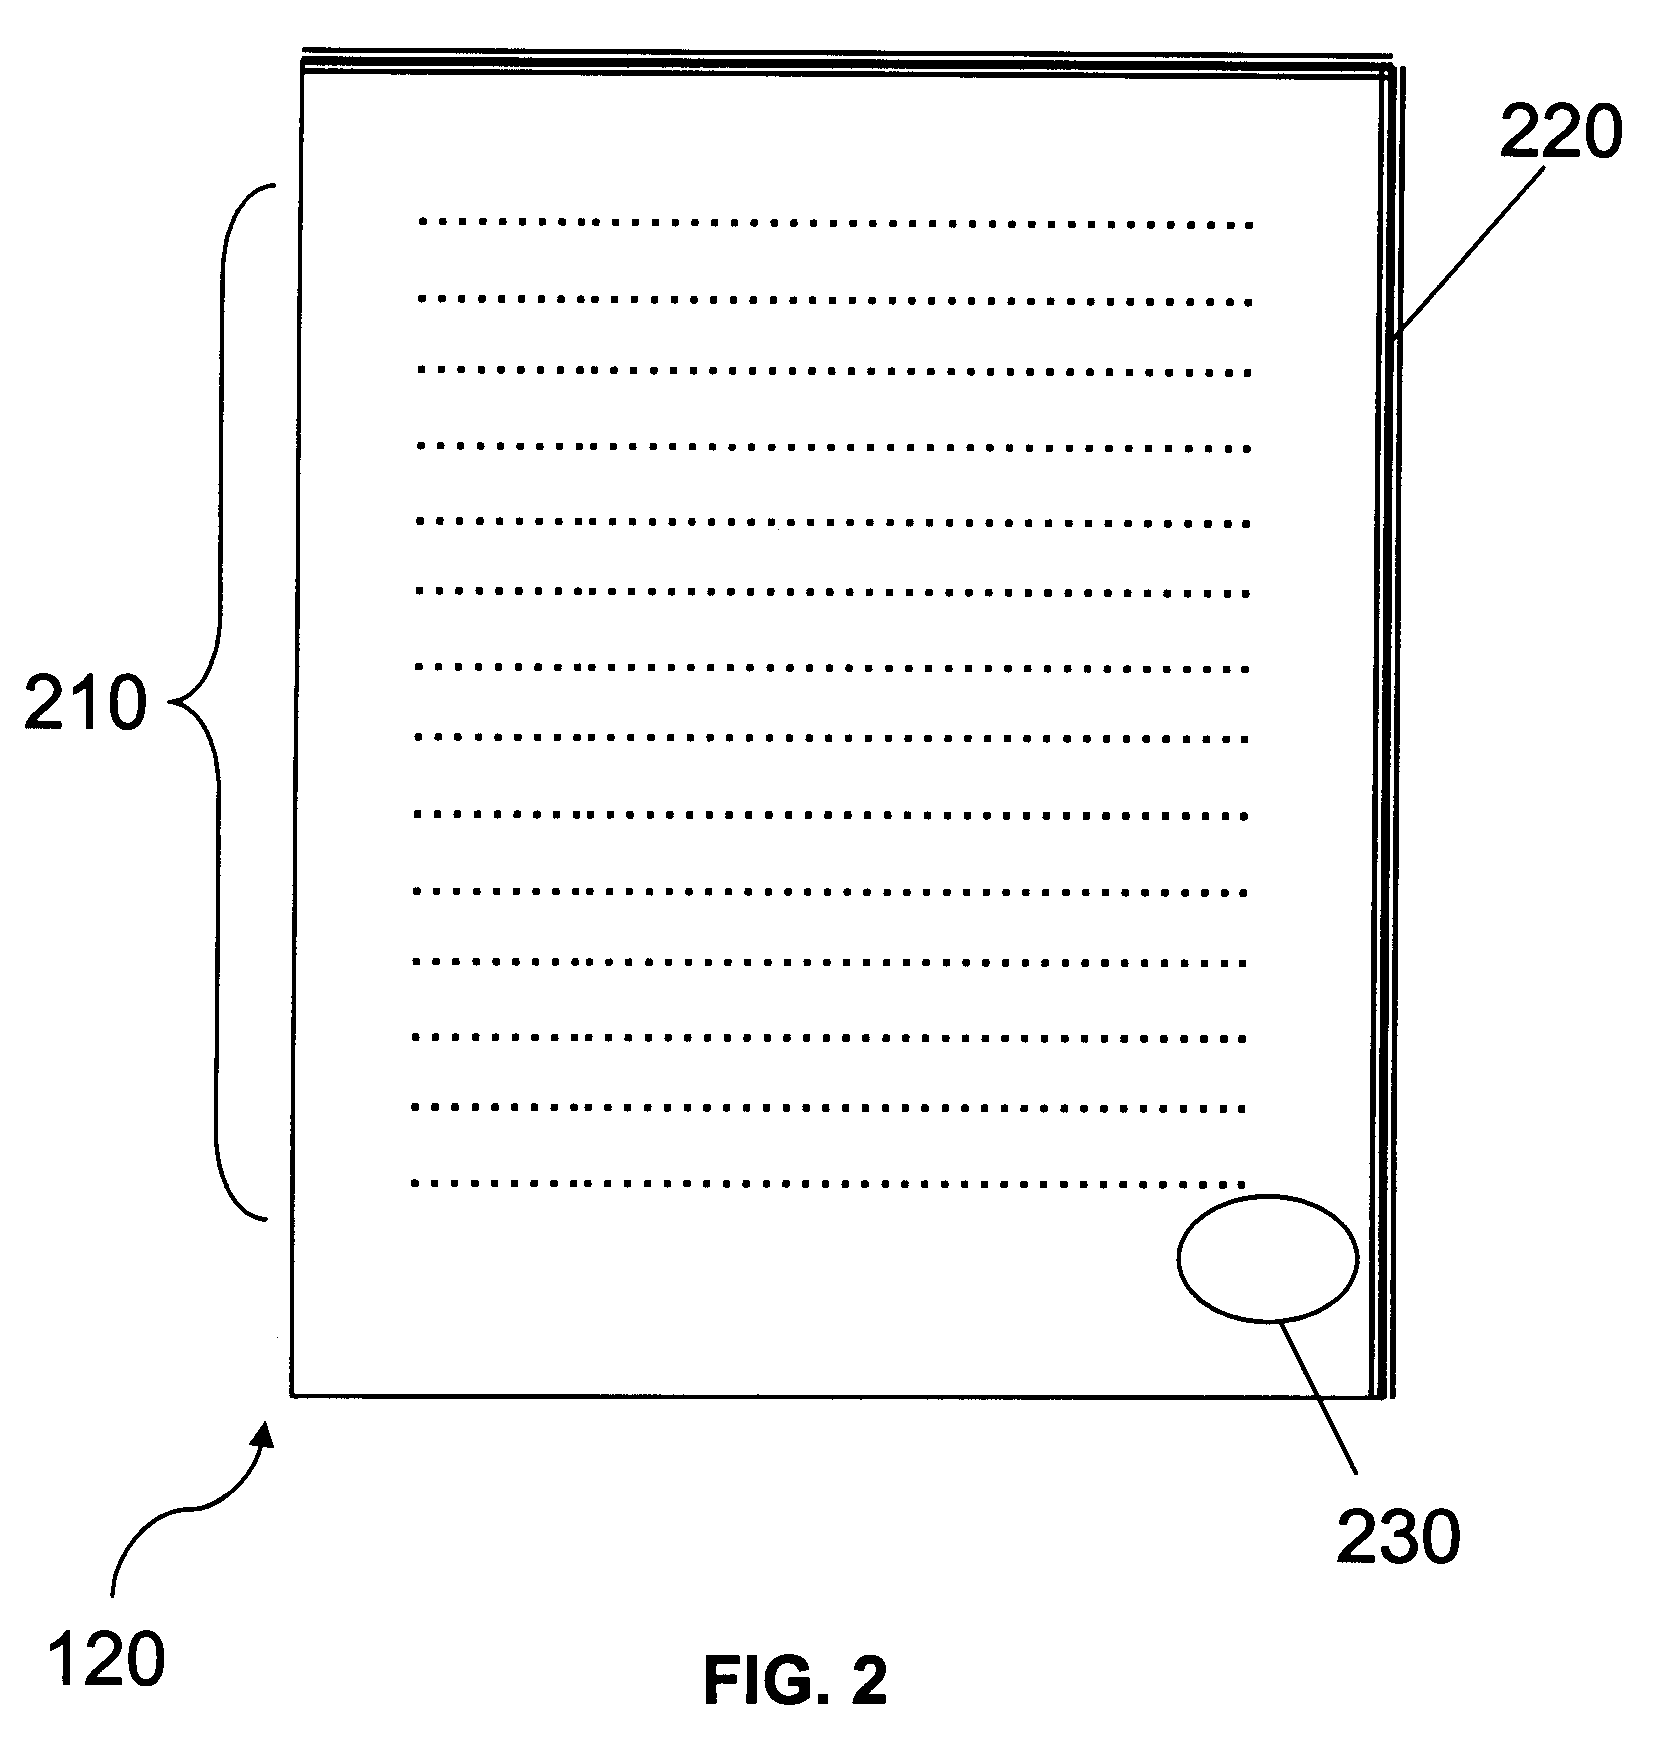 System and methods for predicting failures in a fluid delivery system